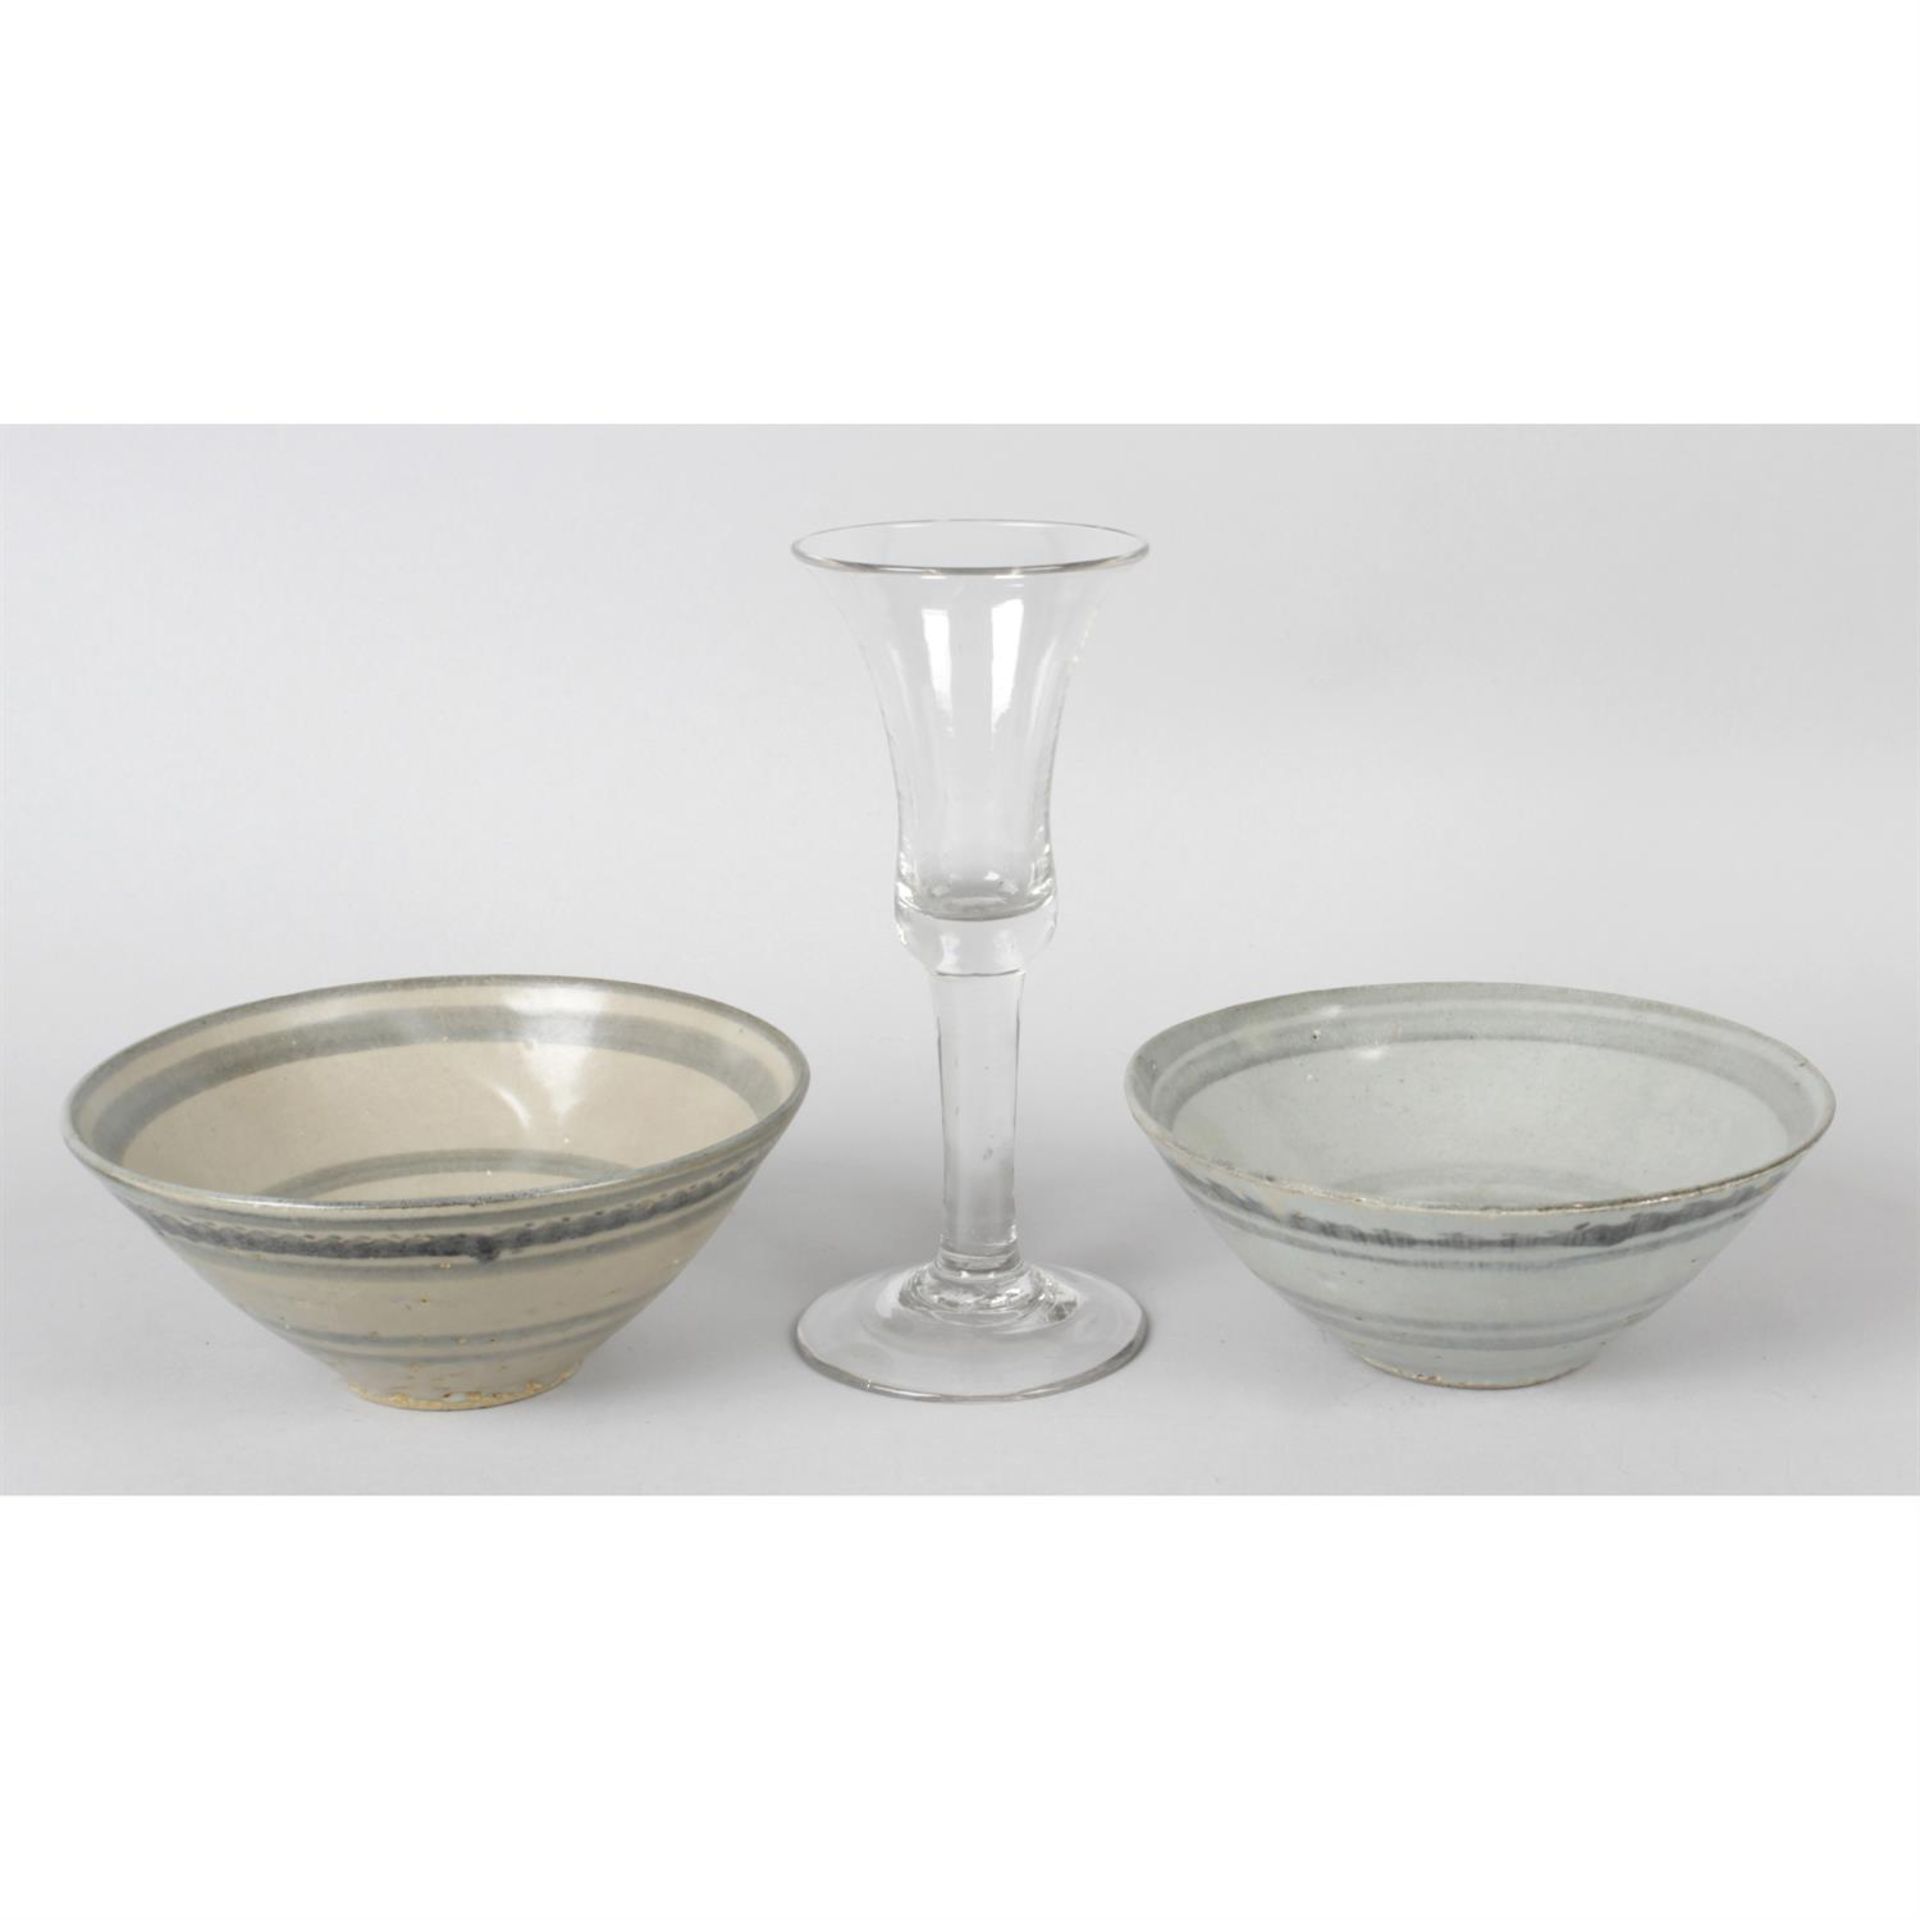 An antique wine glass, together with two Chinese pottery bowls.